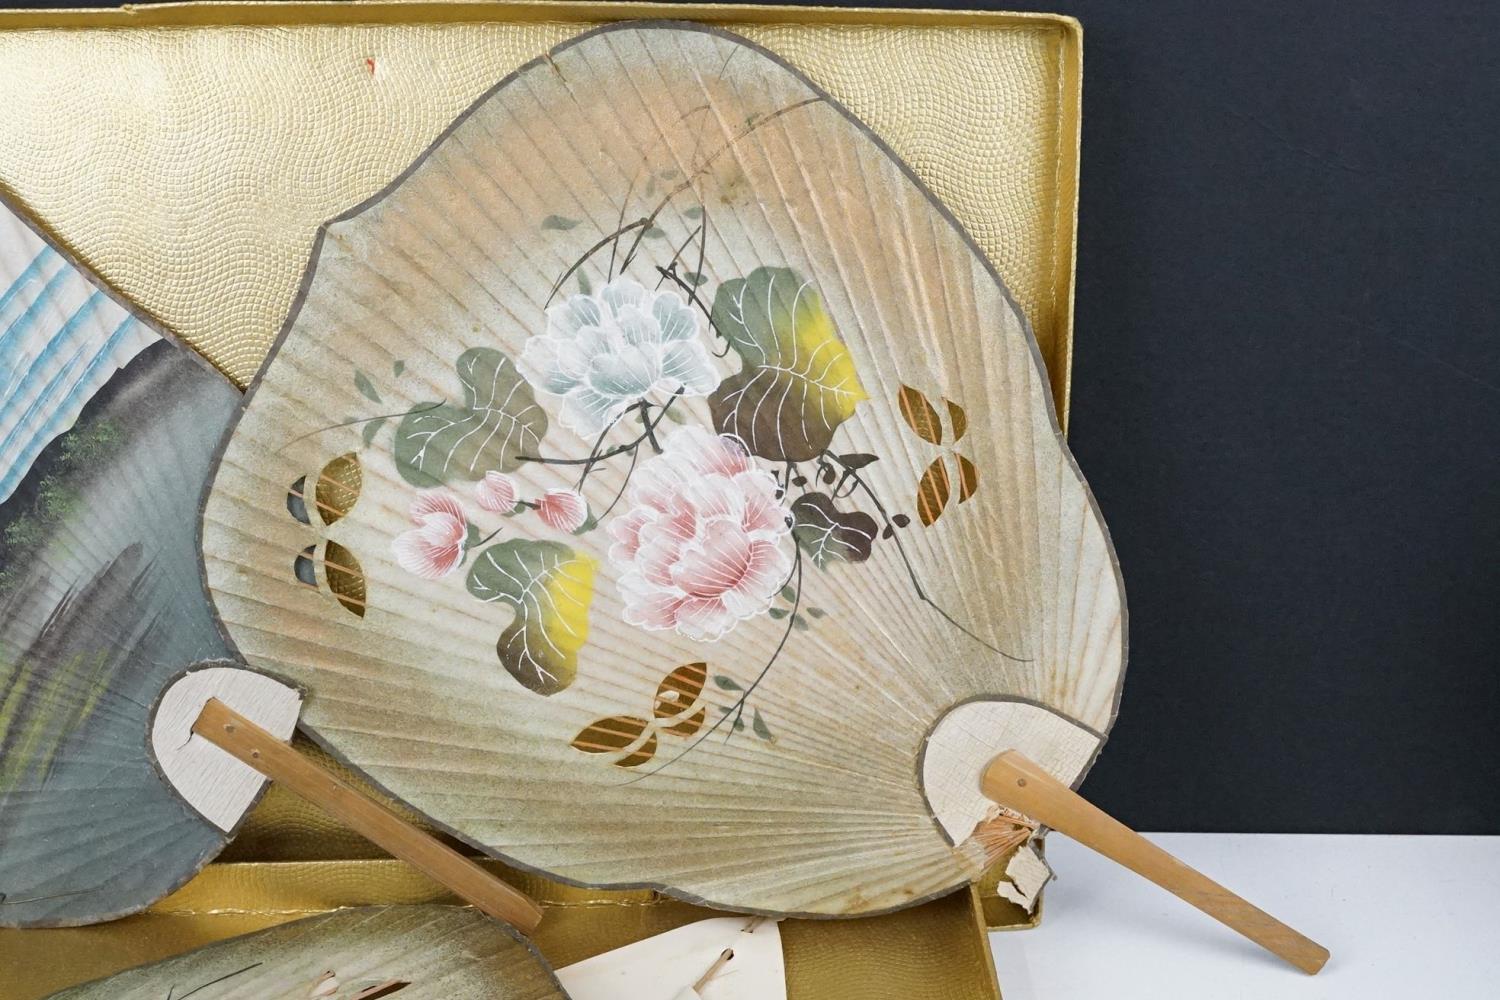 19th Century Victorian japanese boat game consisting of paper fans, with miniature sailing boats. - Image 6 of 8